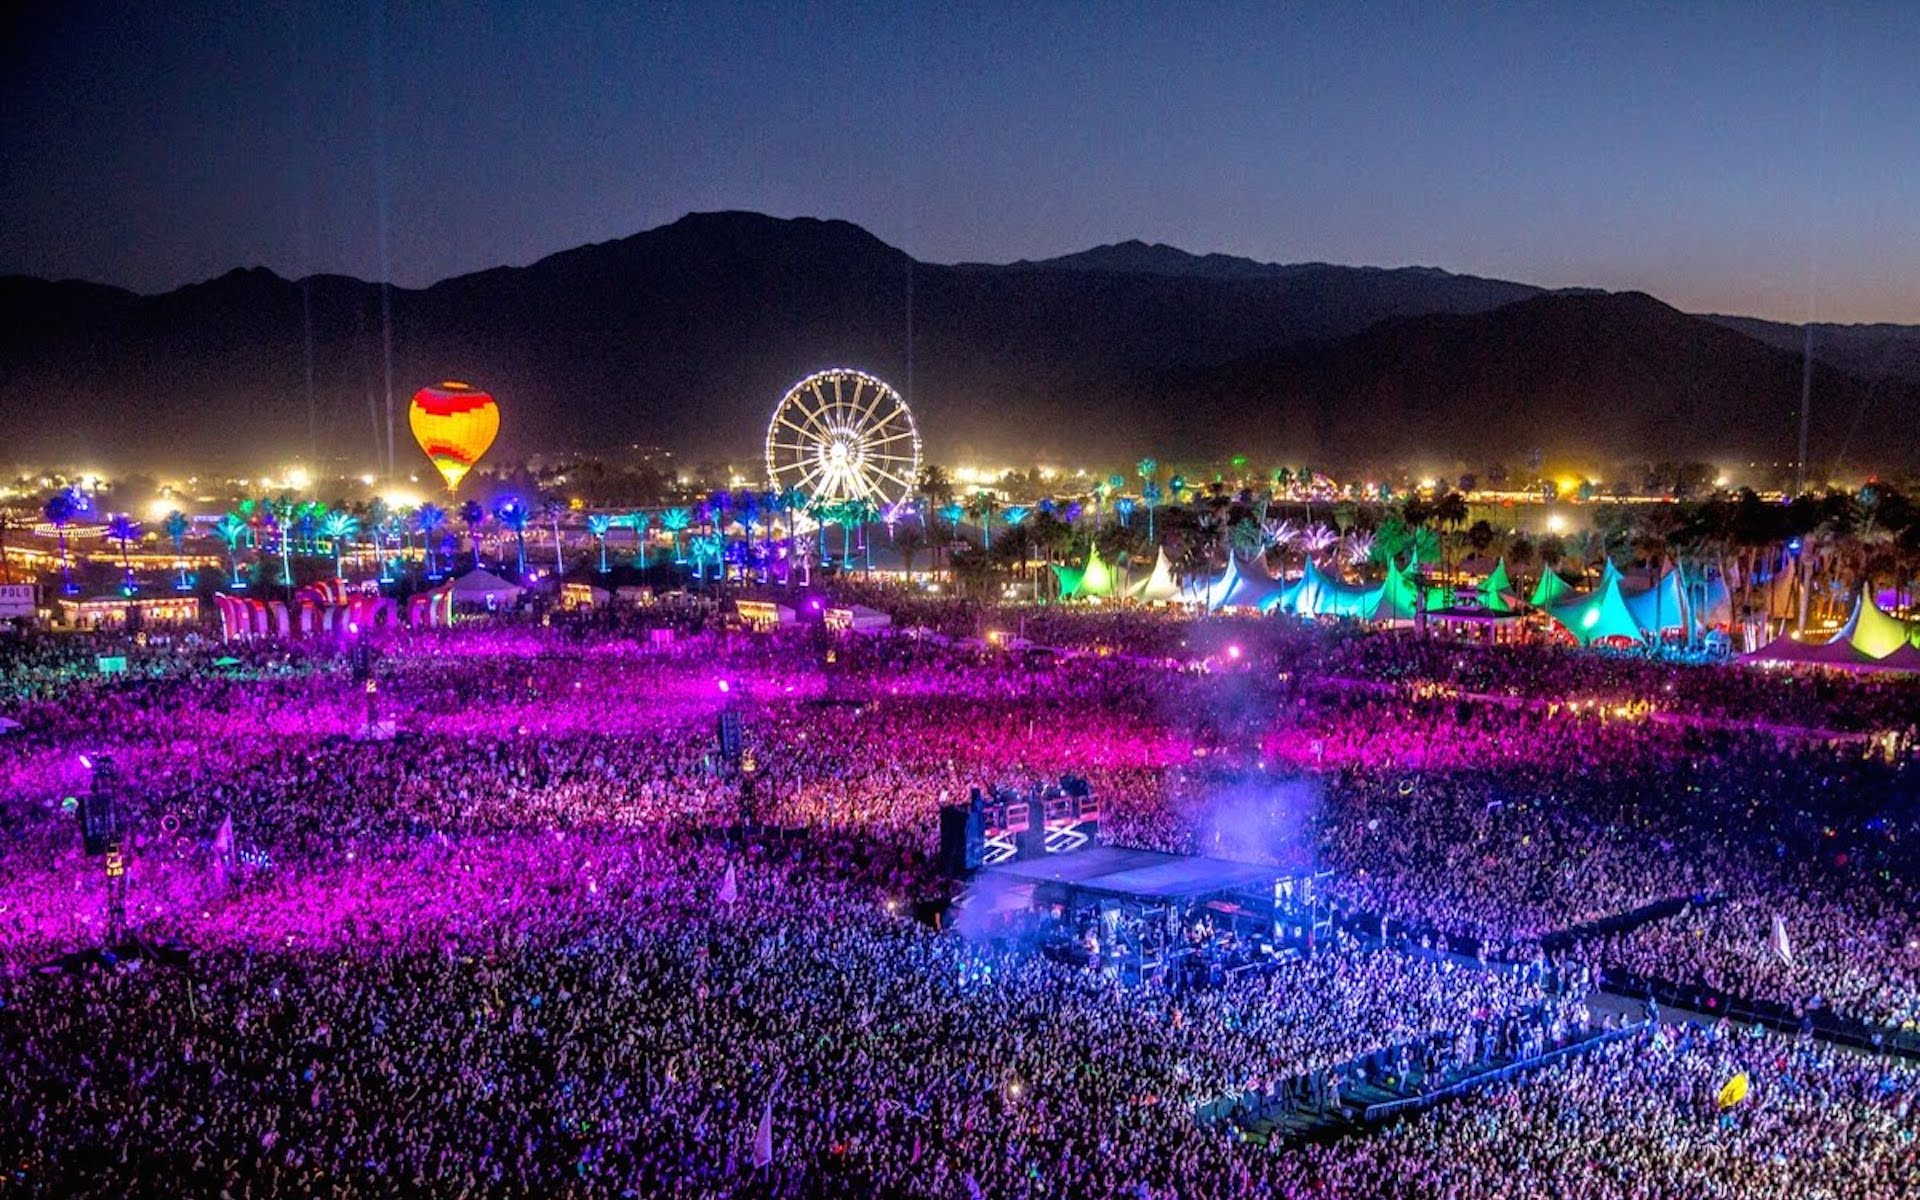 Hacked Coachella alerts website users of significant data breach